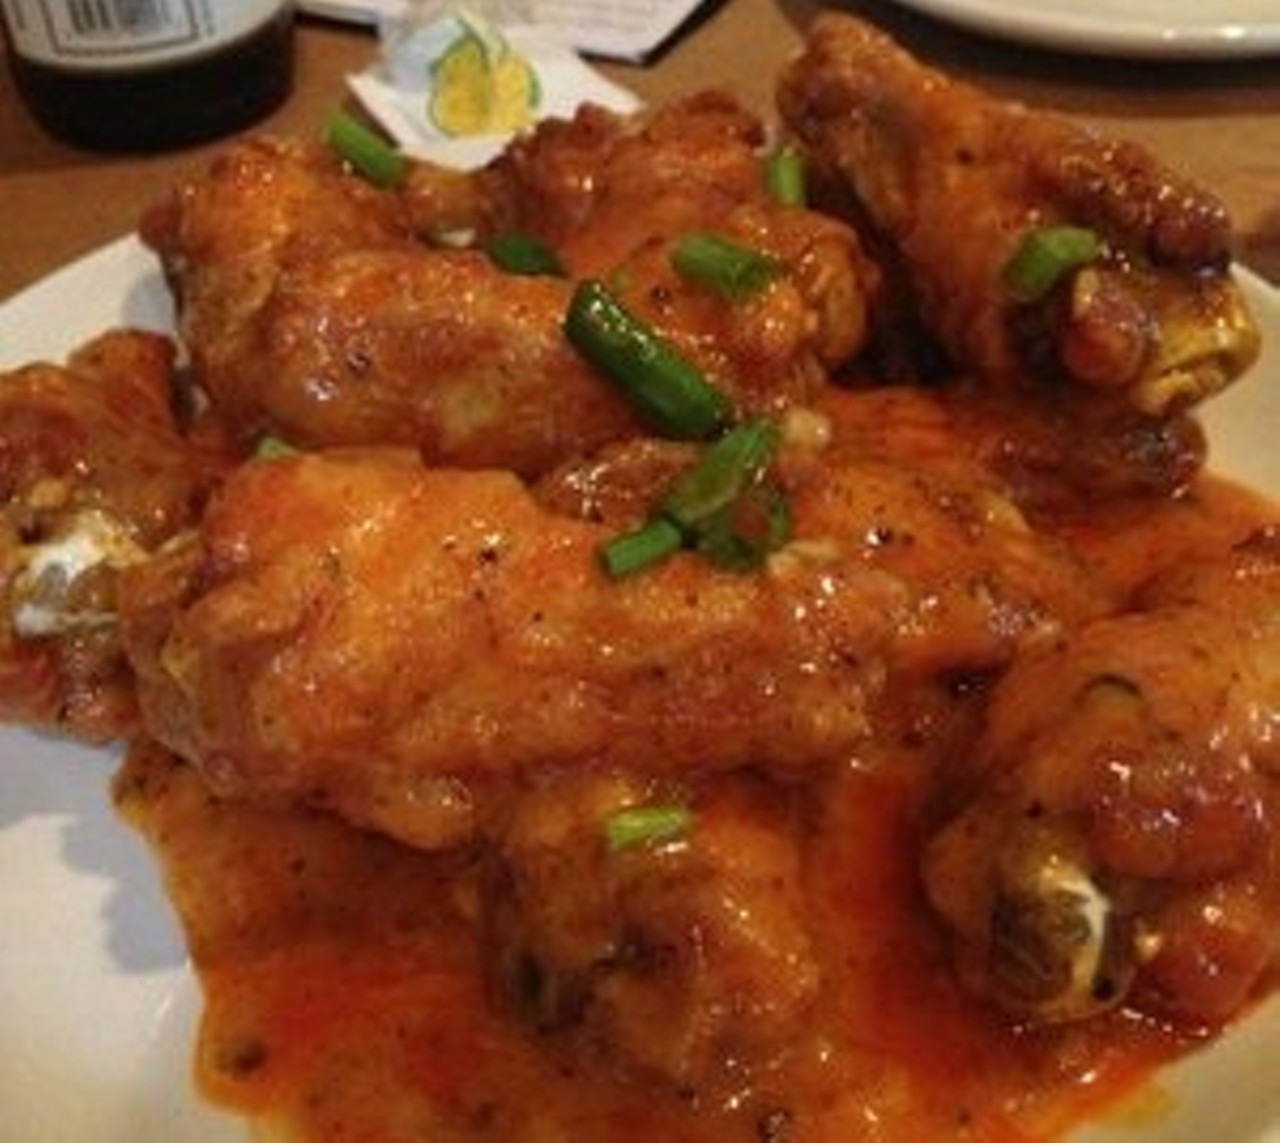 The Rib Cage in Cleveland Heights may be known for its BBQ, but its wings are every bit as flavorful as the Cage's brisket. We suggest the herb Buffalo sauce. You will thank us for this. The Rib Cage is located at 2214 Lee Rd. Call 216-321-7427 for more information.